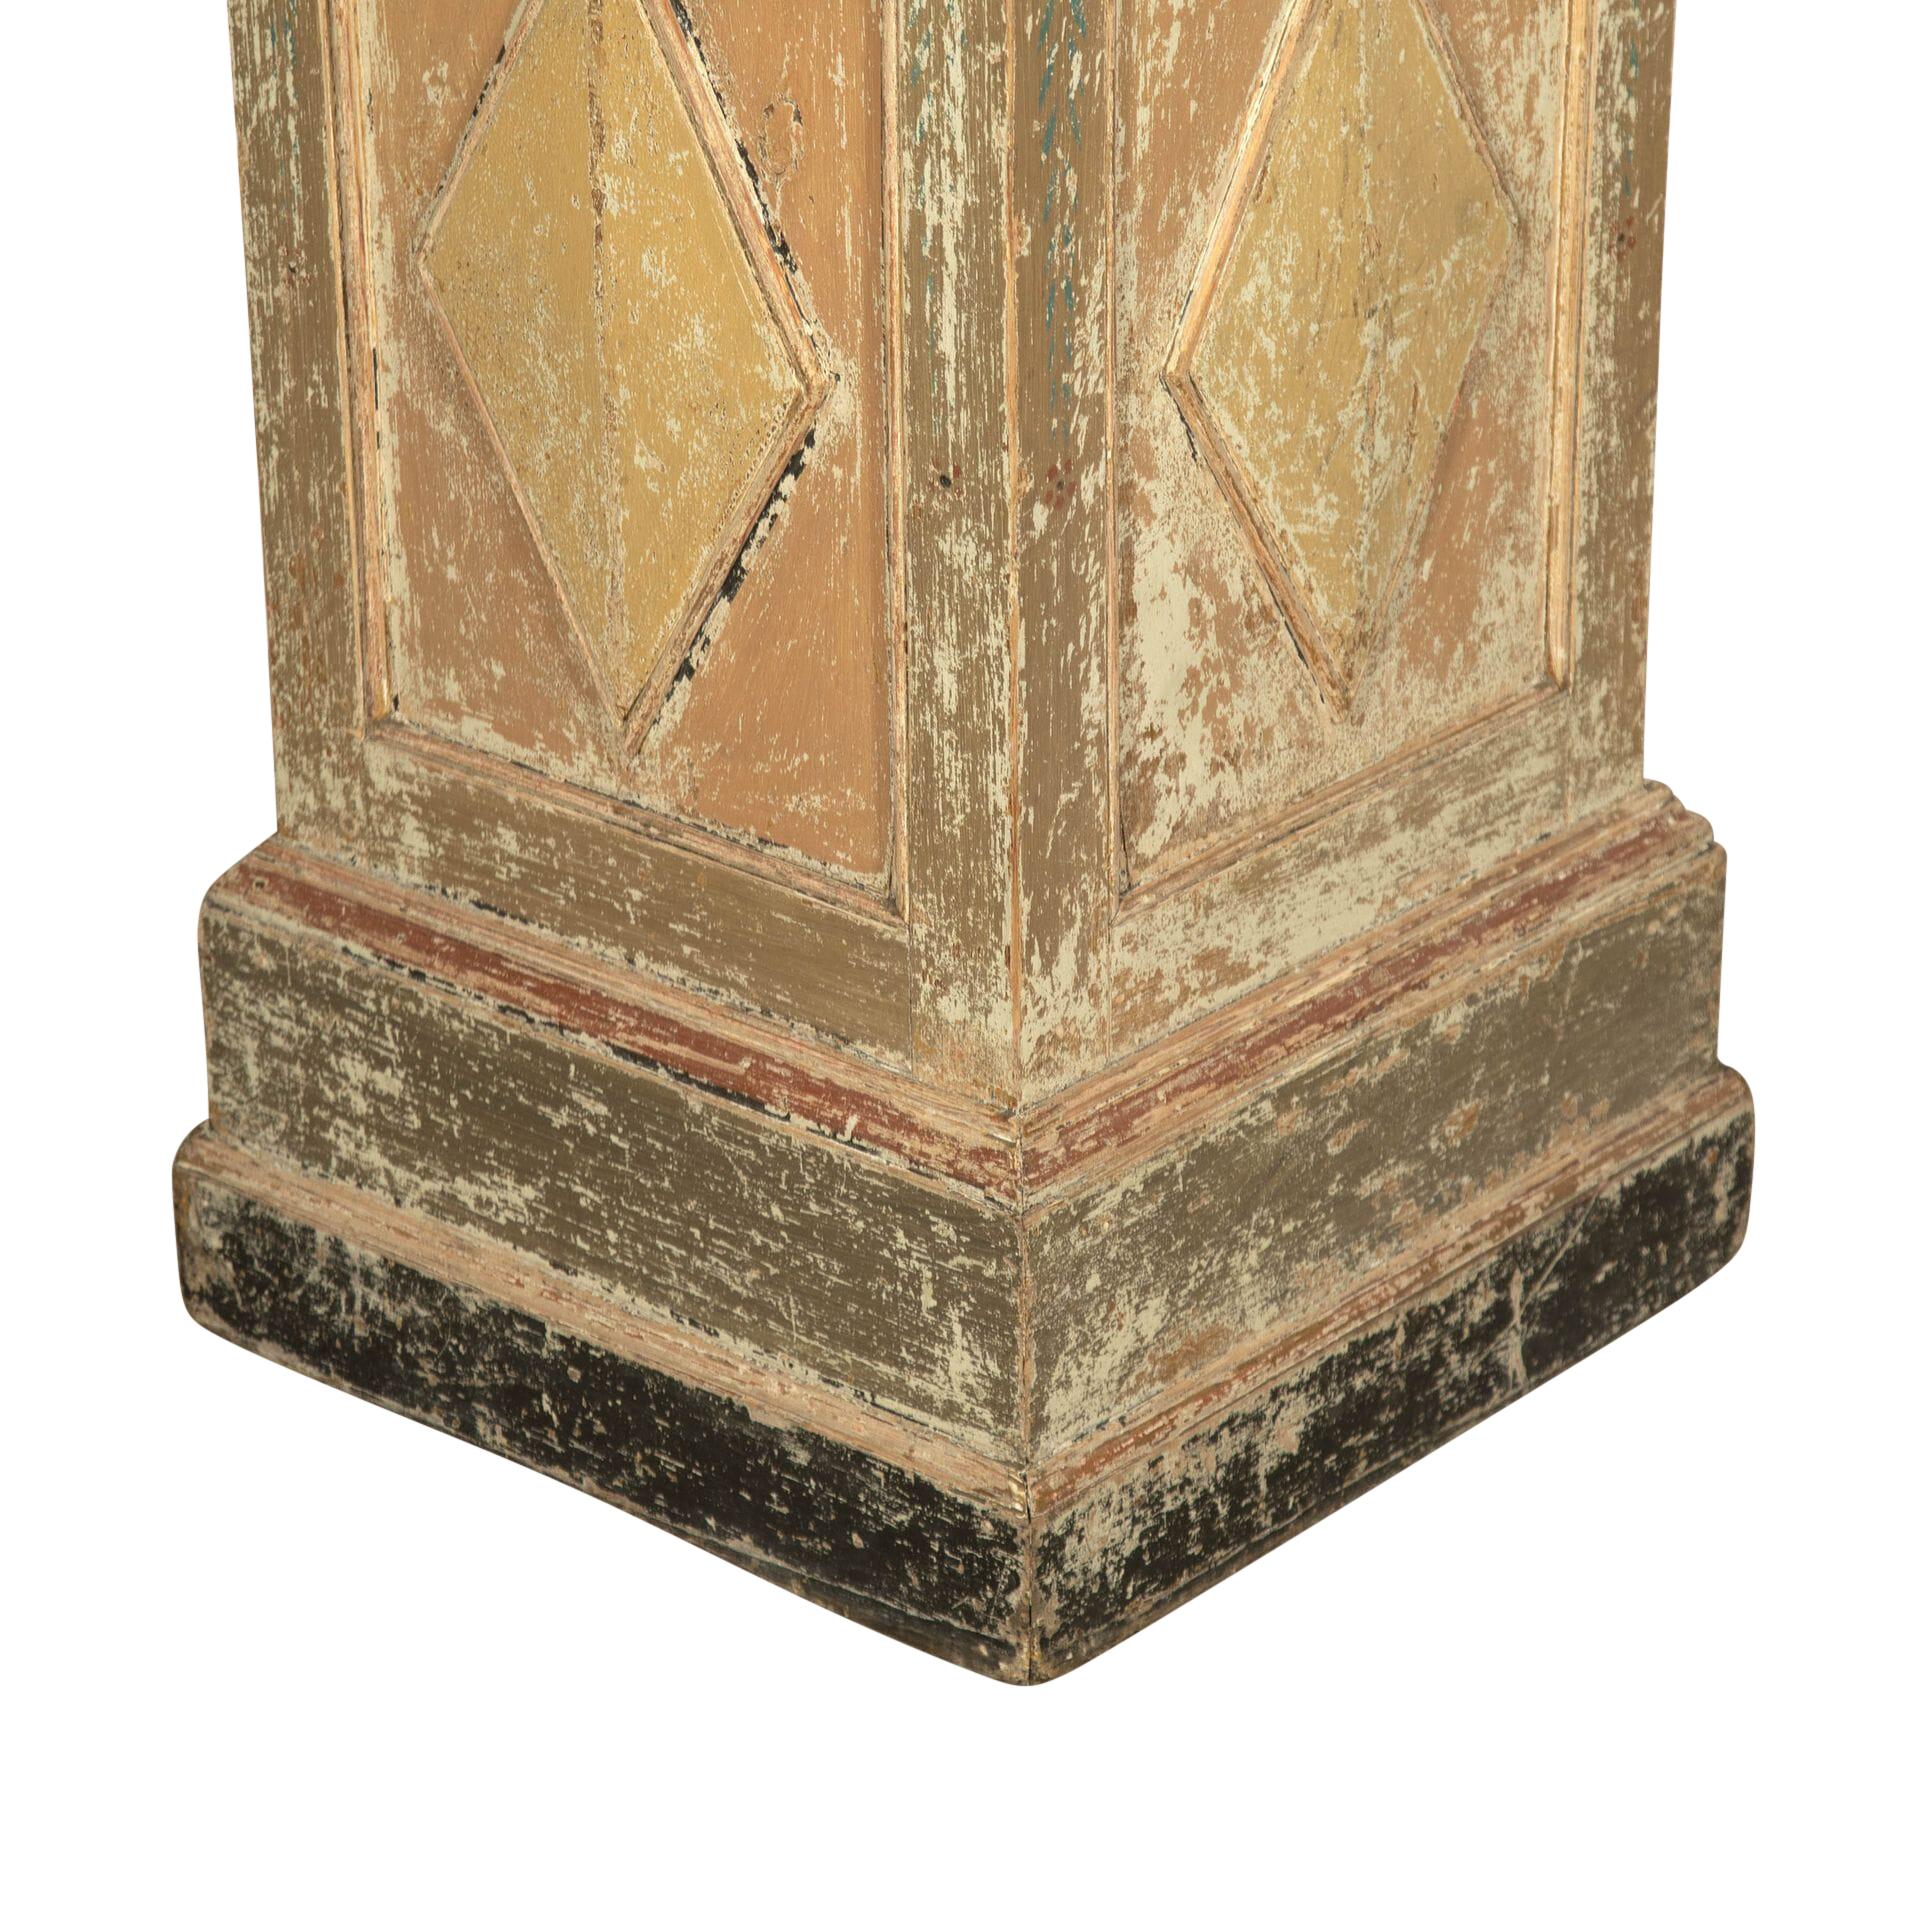 19th century decorative carved wood, scraped to original paint.
Column, ideal display piece for artwork, urn or statue.